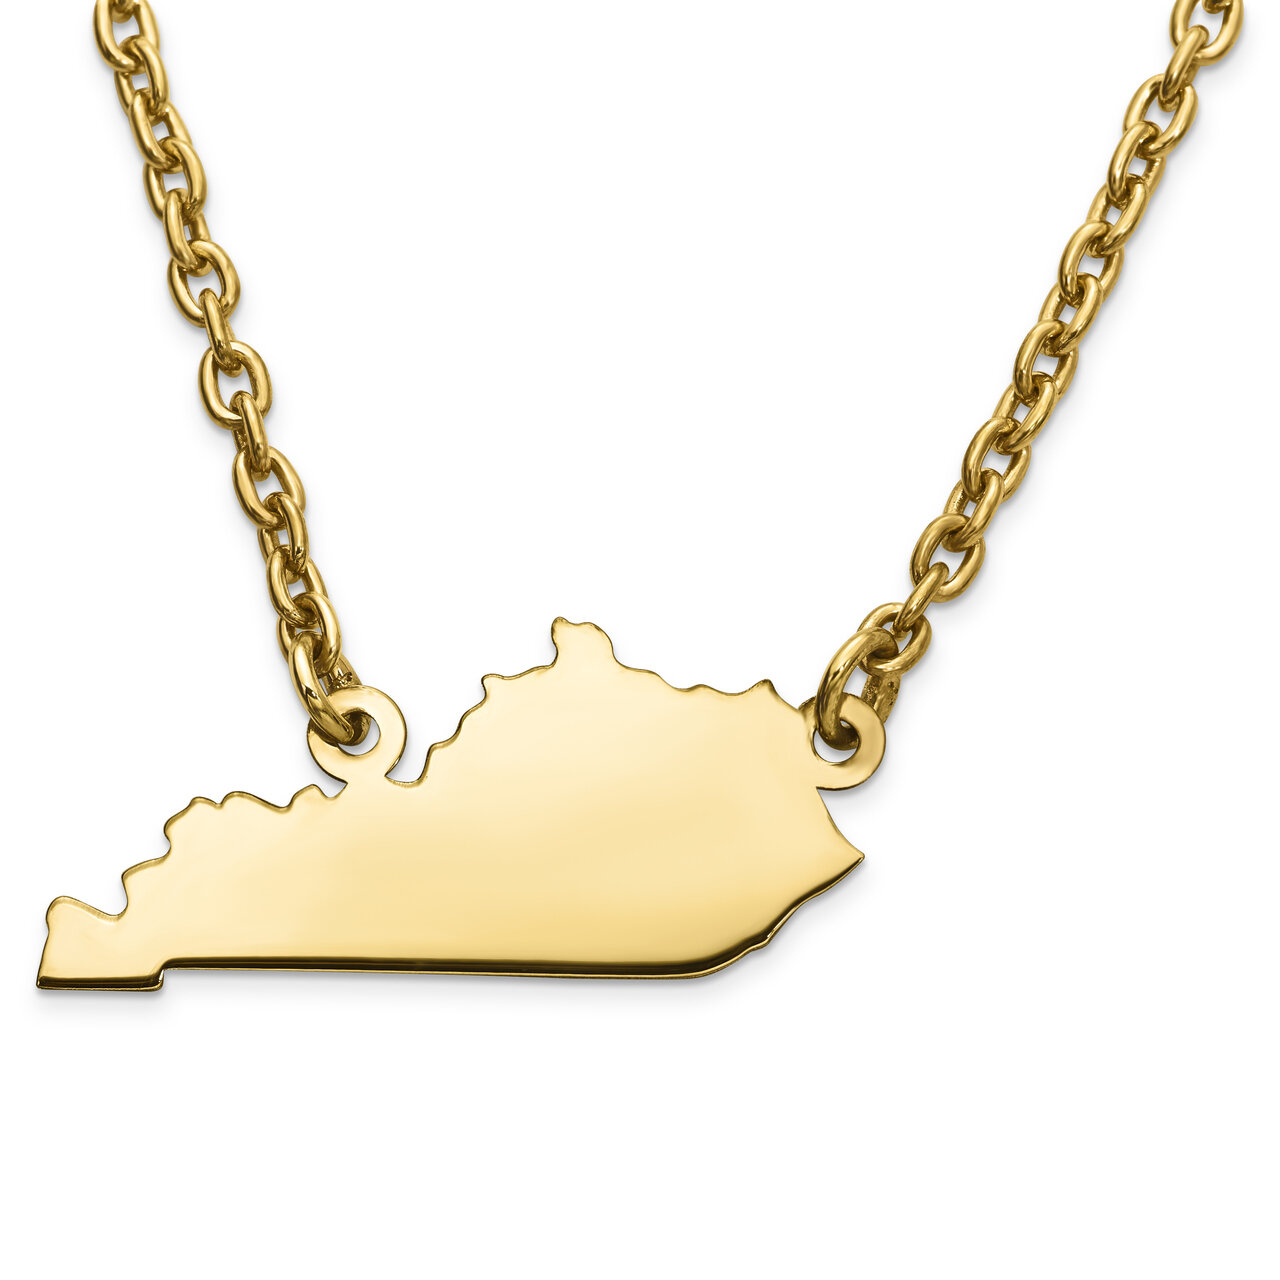 Kentucky State Pendant Necklace with Chain 14k Yellow Gold Engravable XNA706Y-KY